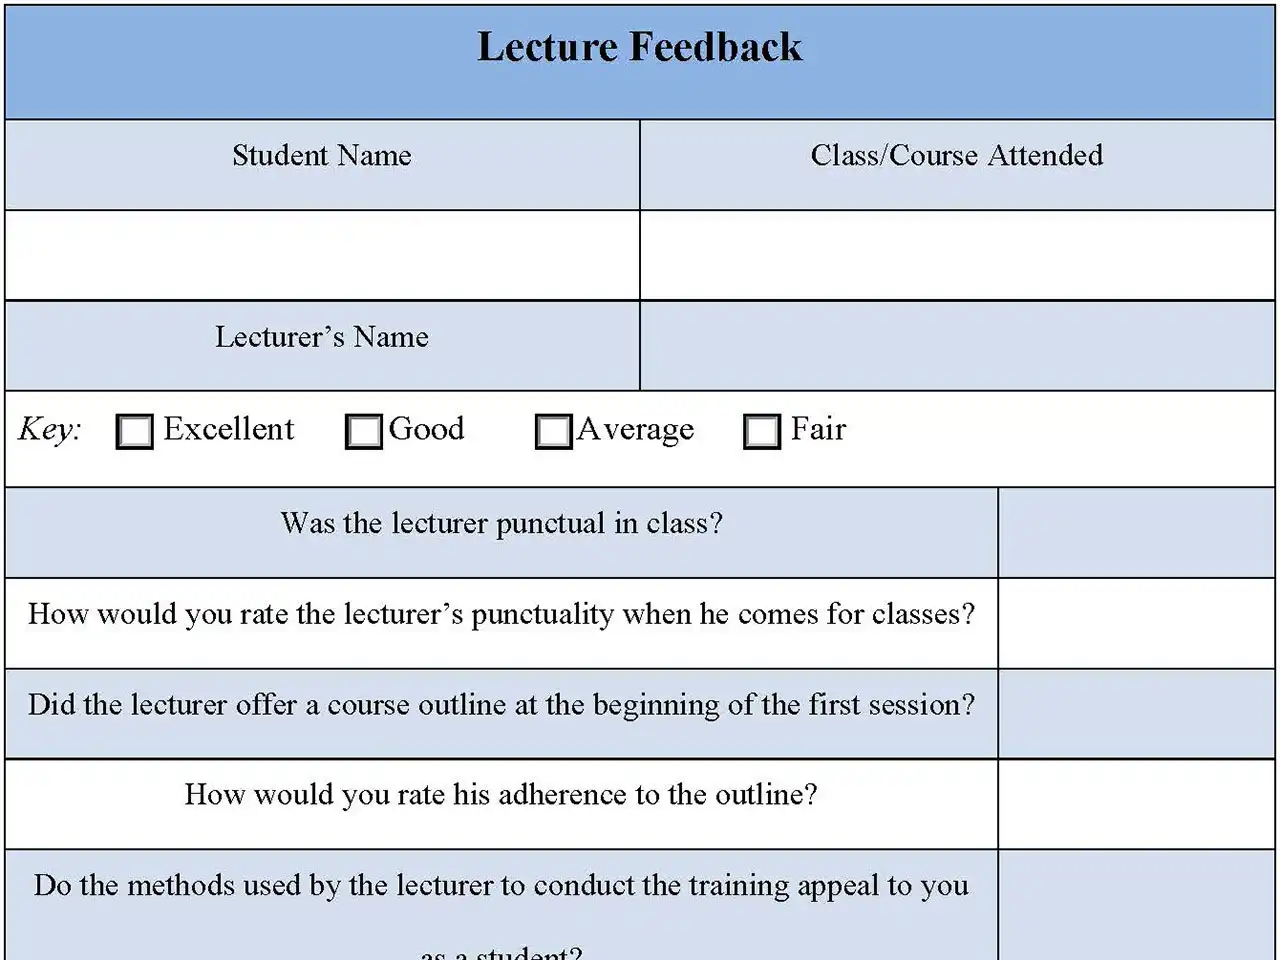 Lecture Feedback Form